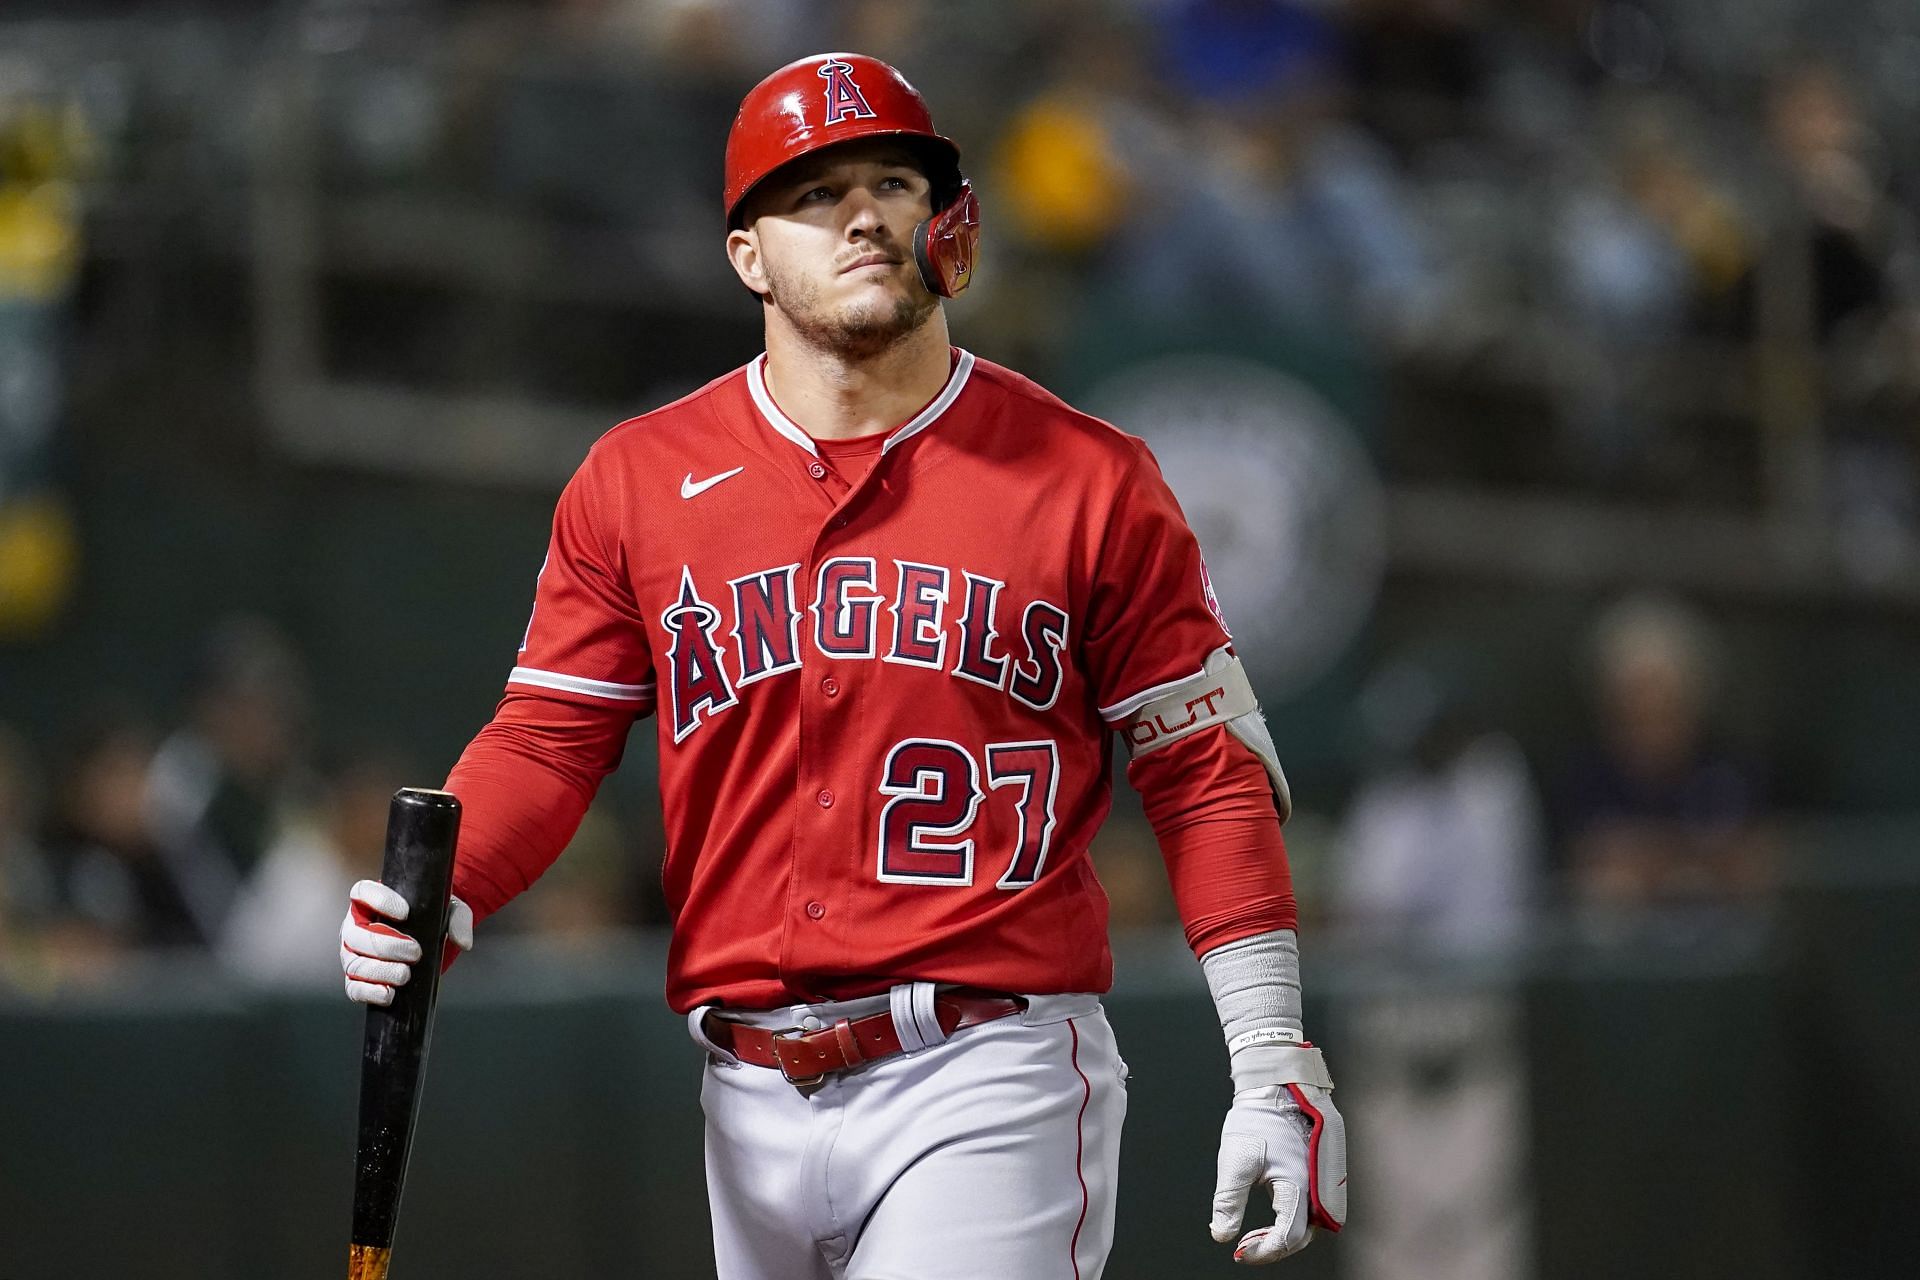 Mike Trout walks back to dug out after a pop fly against the Oakland Athletics